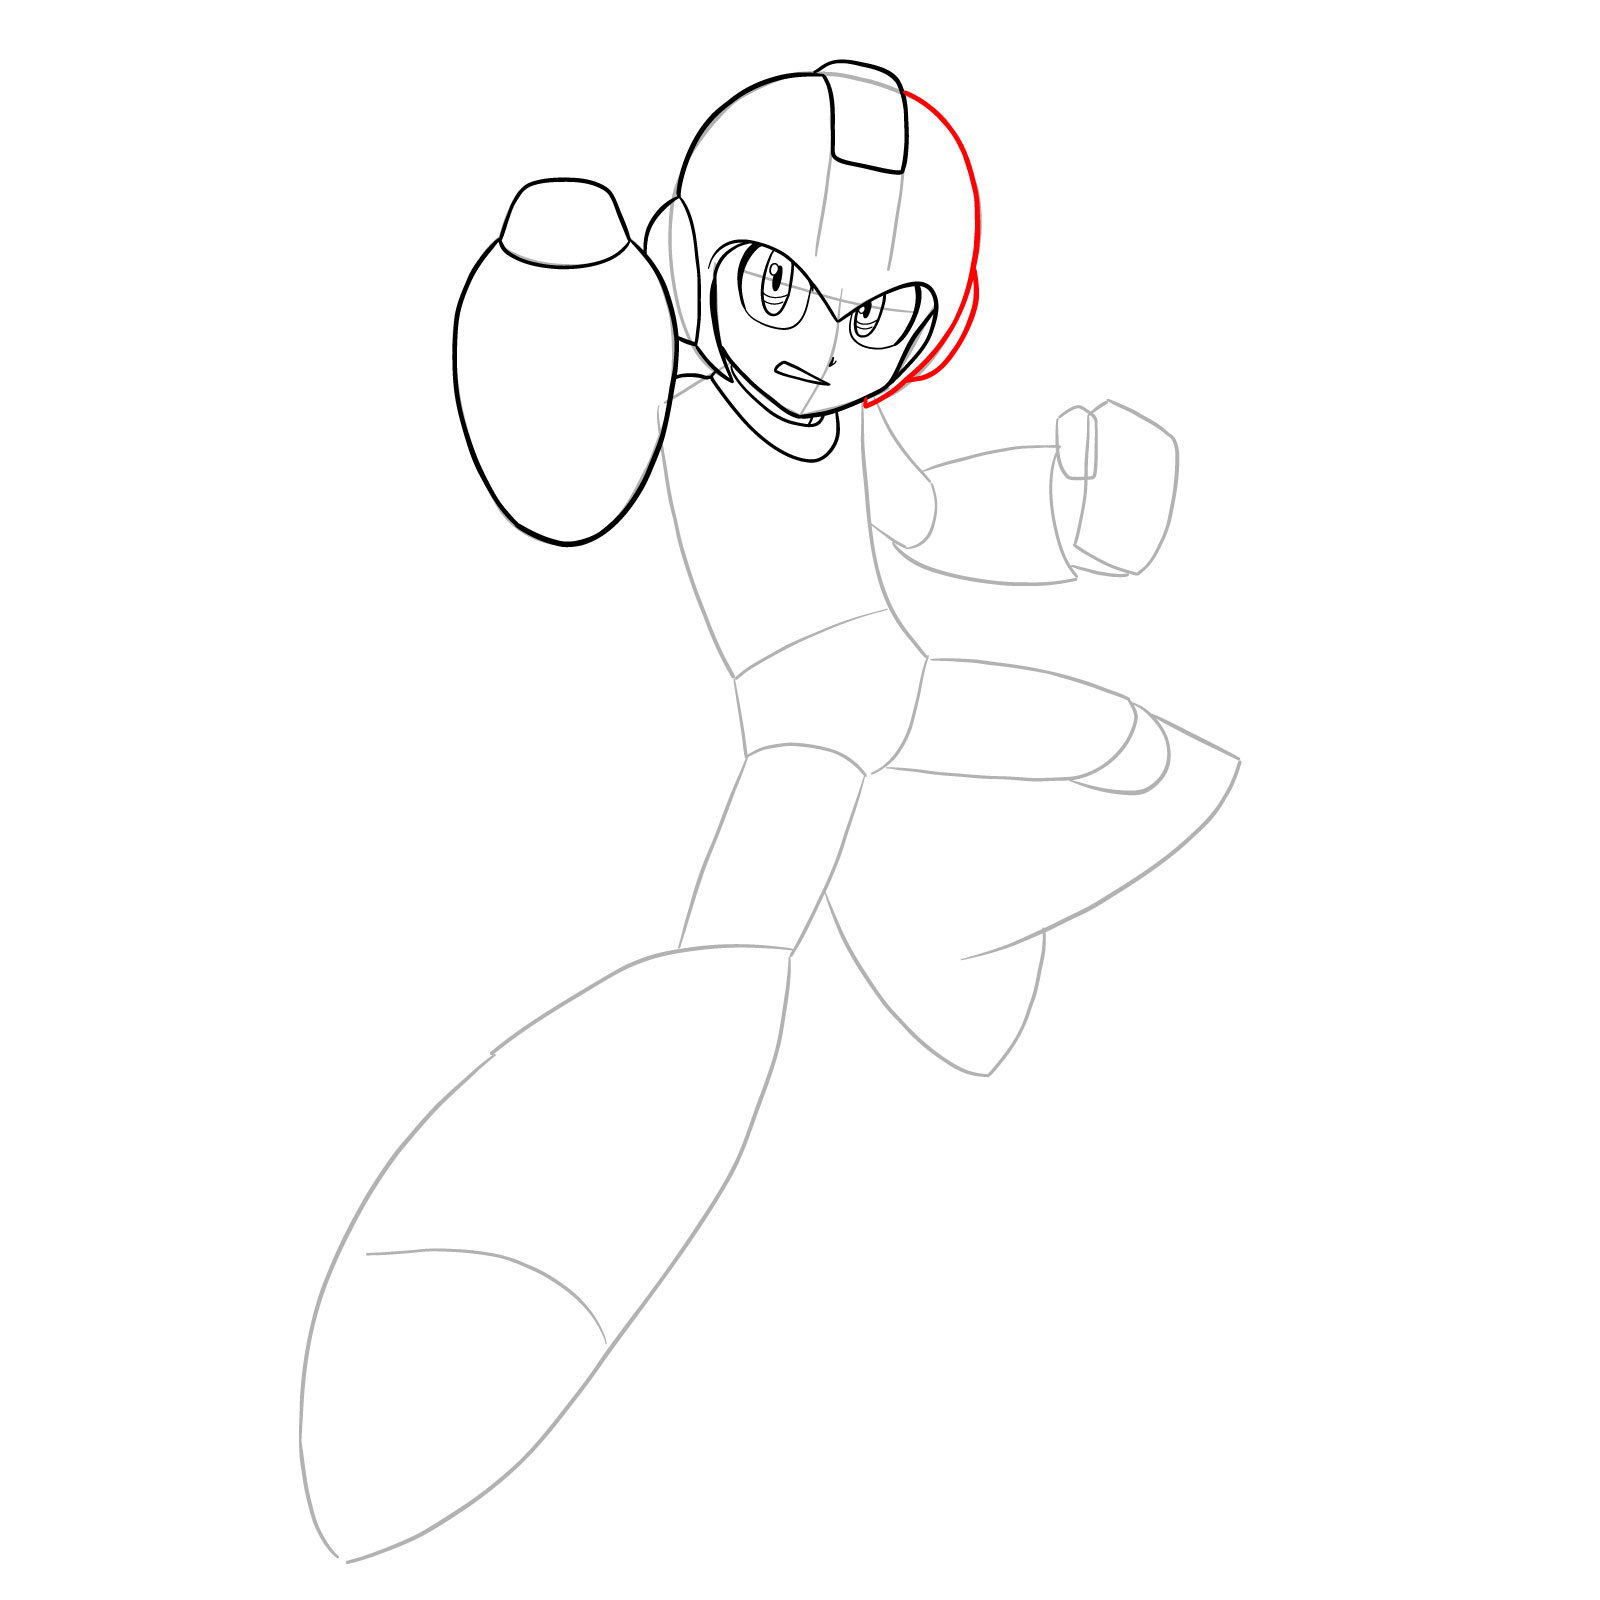 How to draw Mega Man from the 11th game - step 14